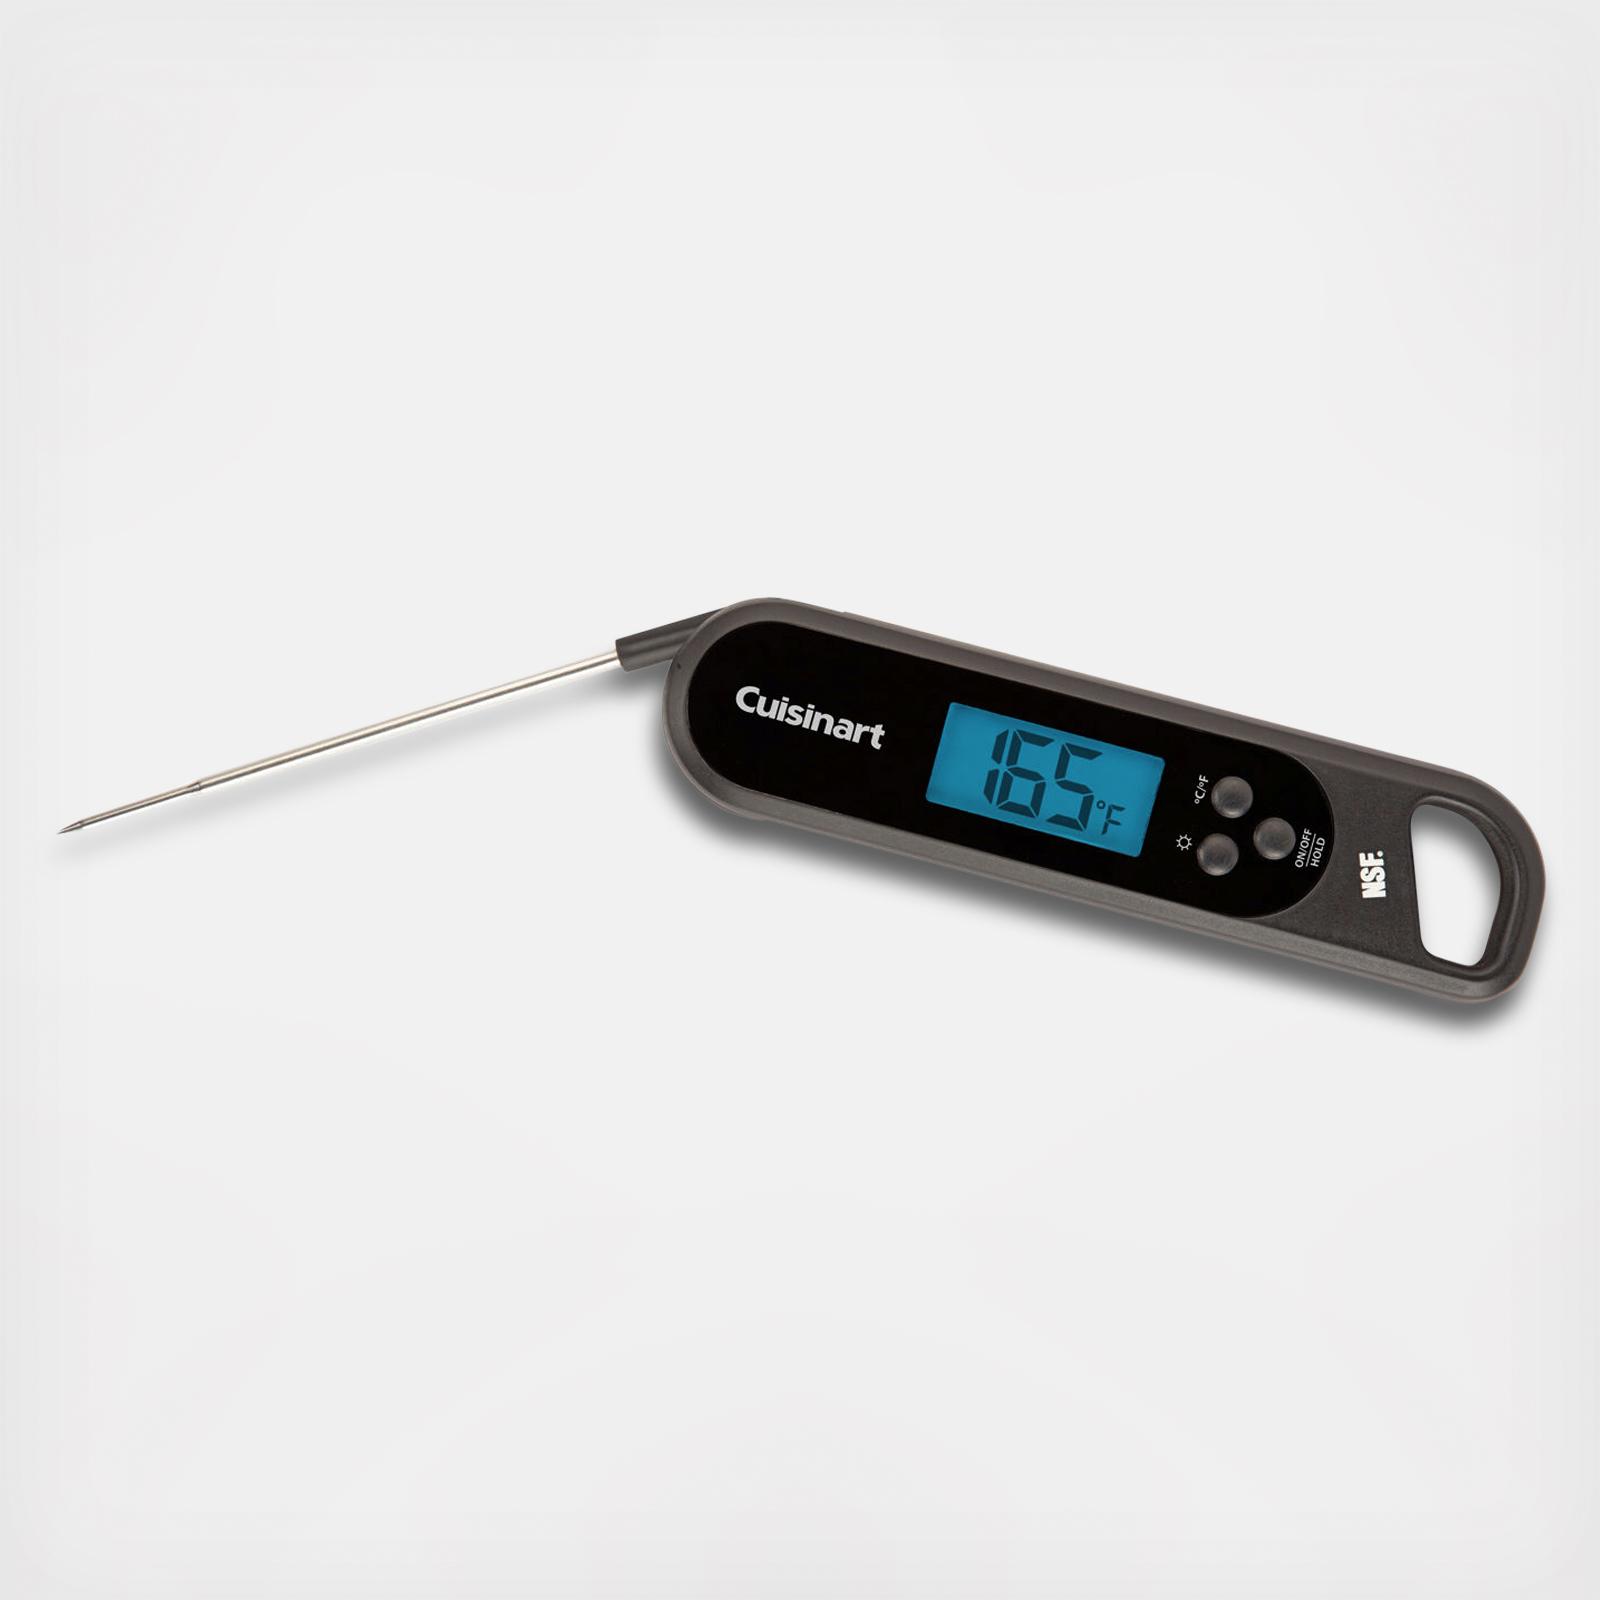 Polder Grill Surface Thermometer